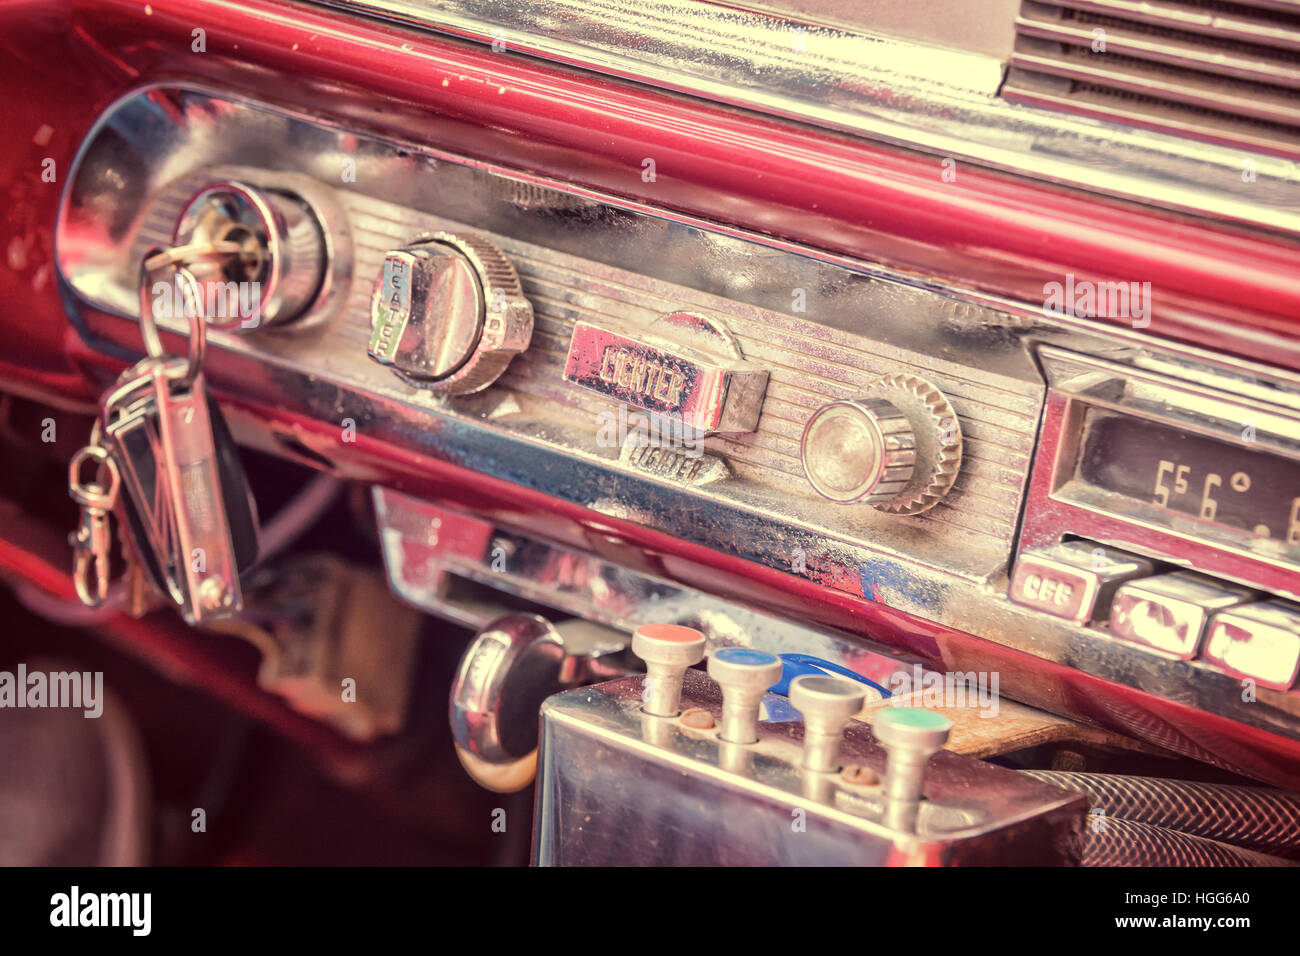 Inside of a vintage classic american car in Cuba, vintage process Stock Photo